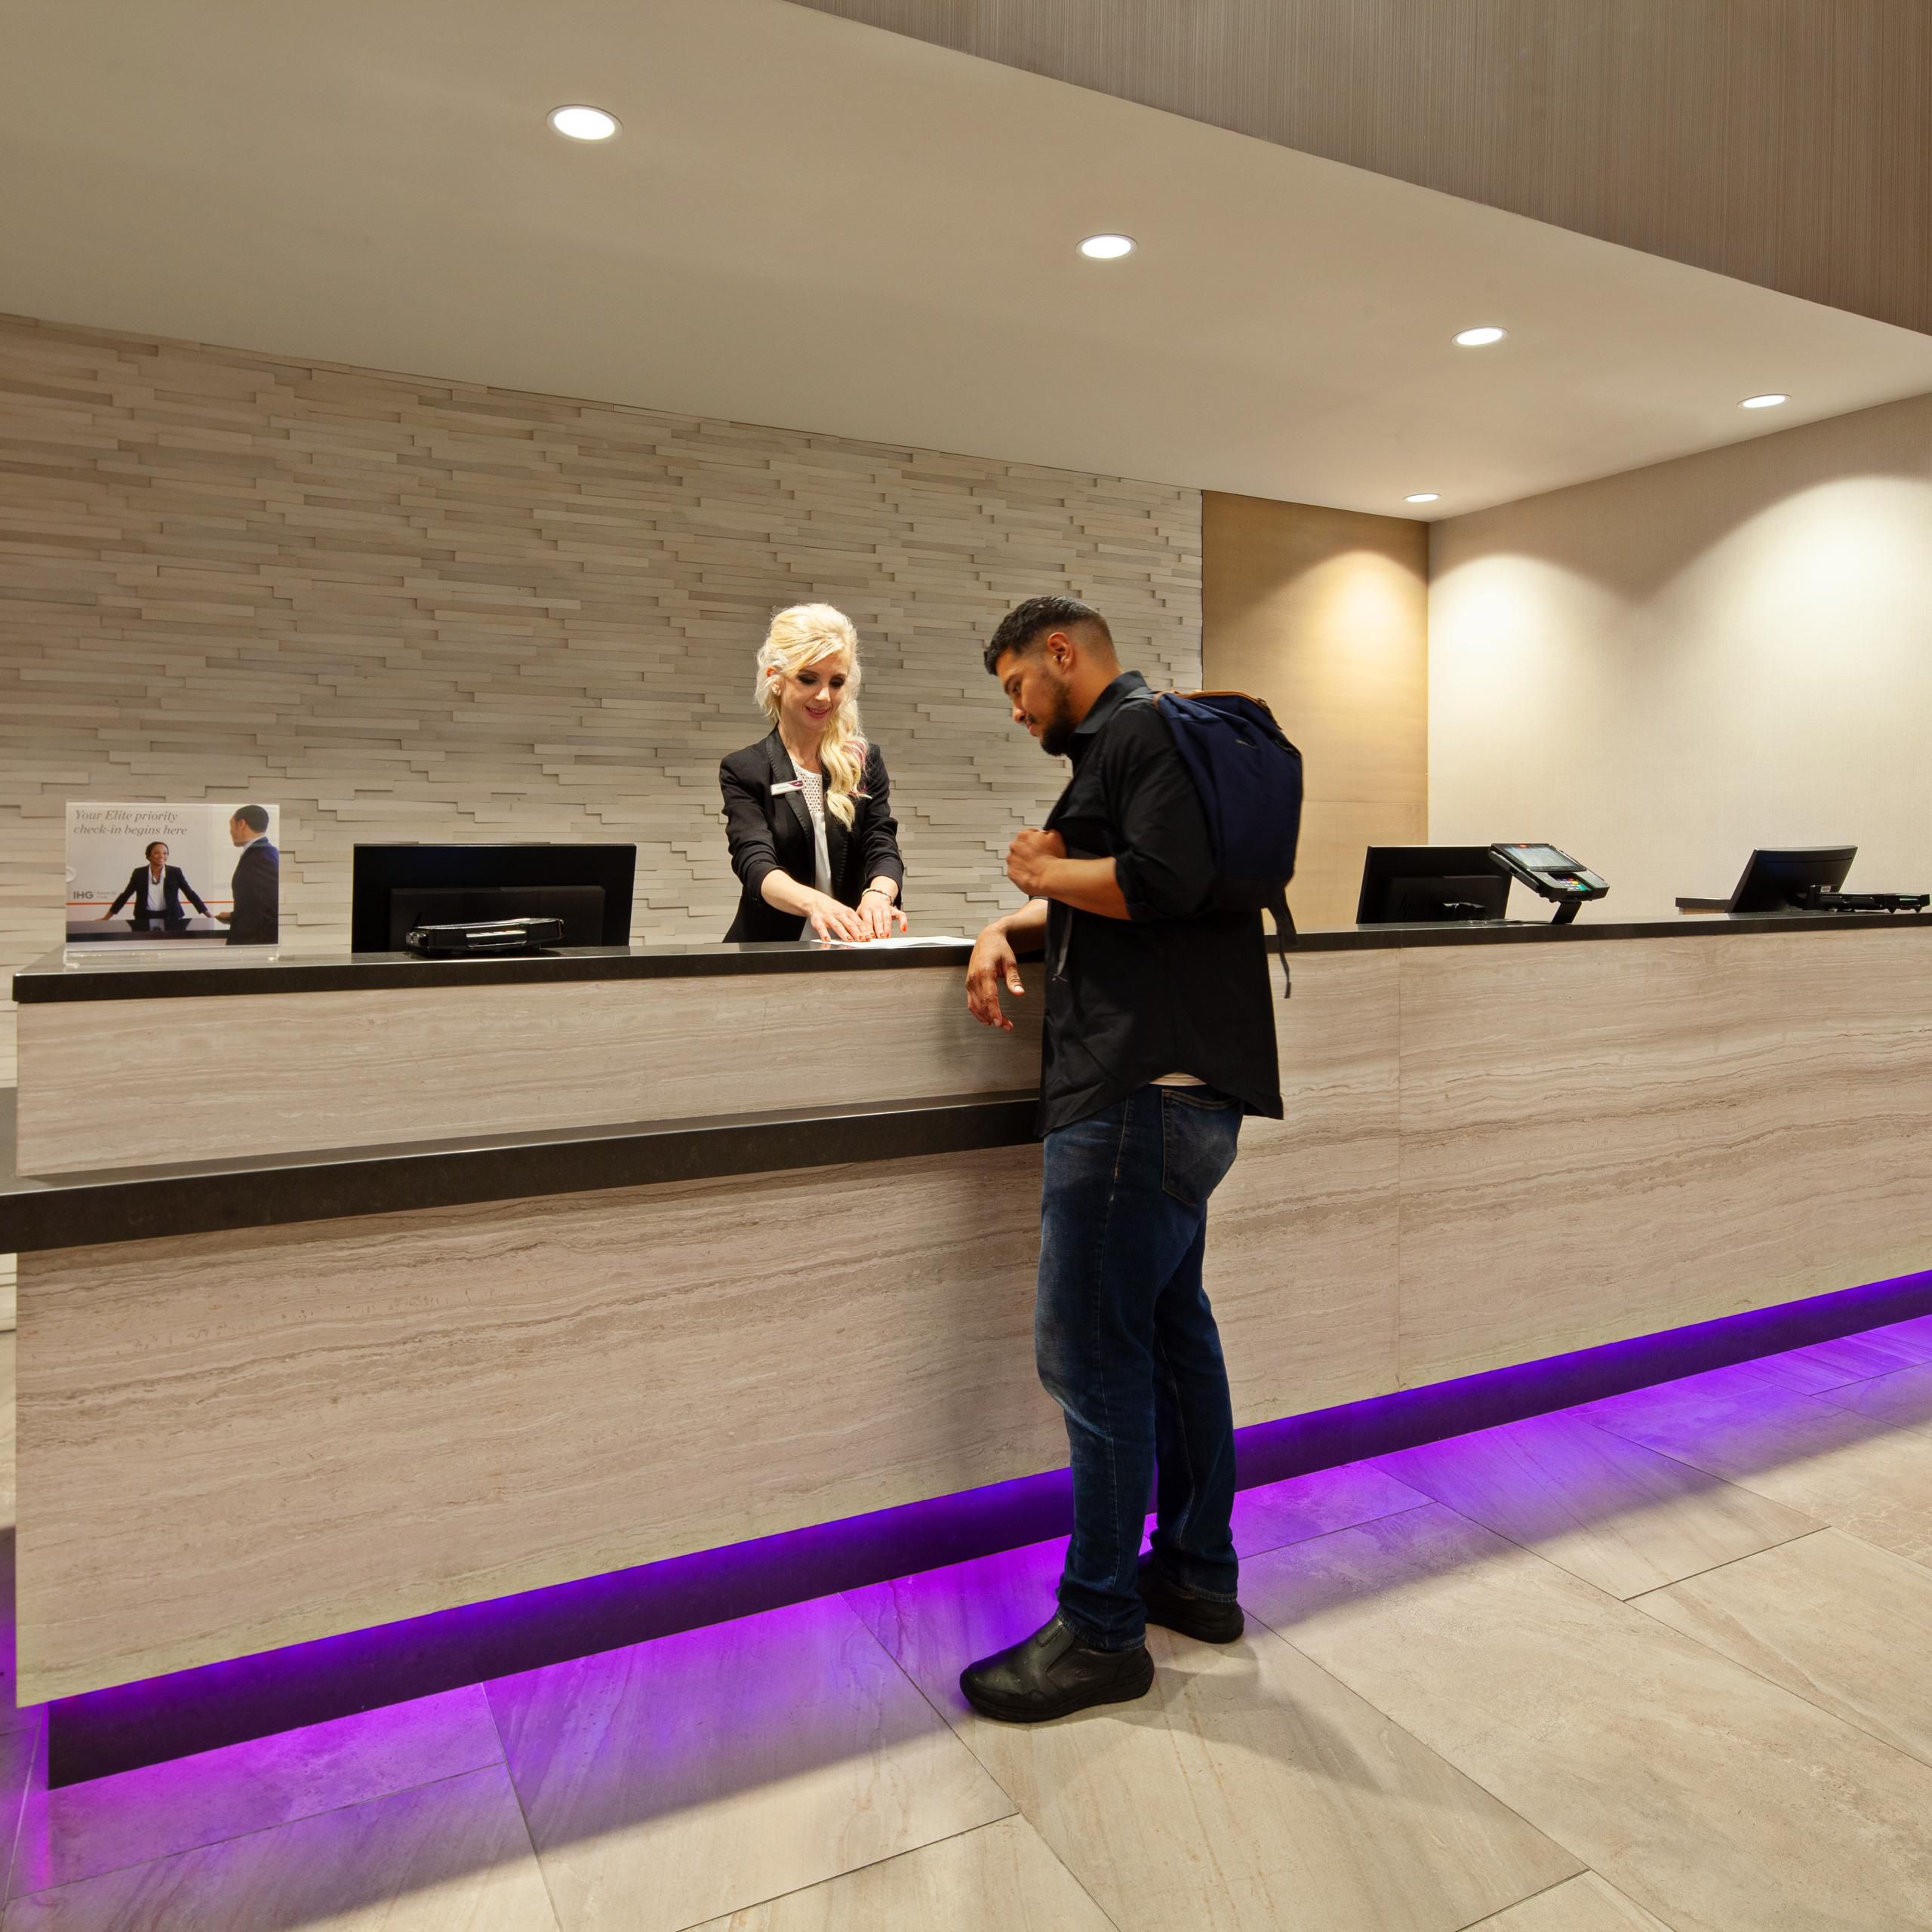 The Front Desk where expert and friendly staff are ready to help.